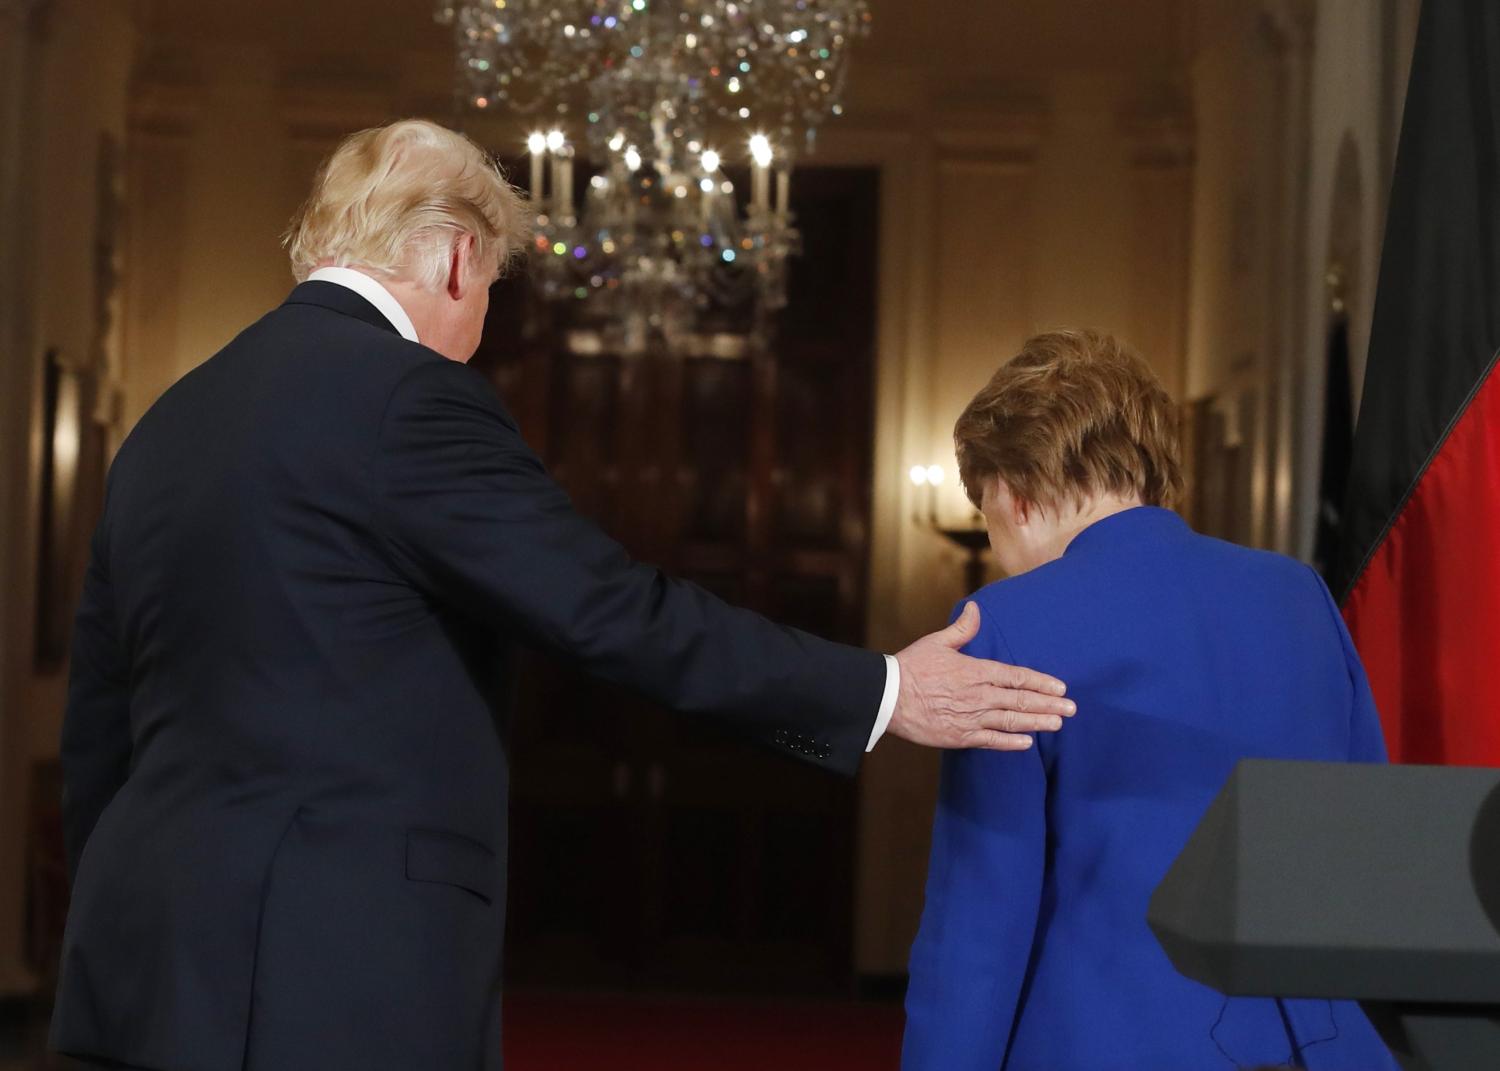 U.S. President Donald Trump and Germany's Chancellor Angela Merkel depart after a joint news conference in the East Room of the White House in Washington, U.S., April 27, 2018. REUTERS/Kevin Lamarque - HP1EE4R1GG1H3